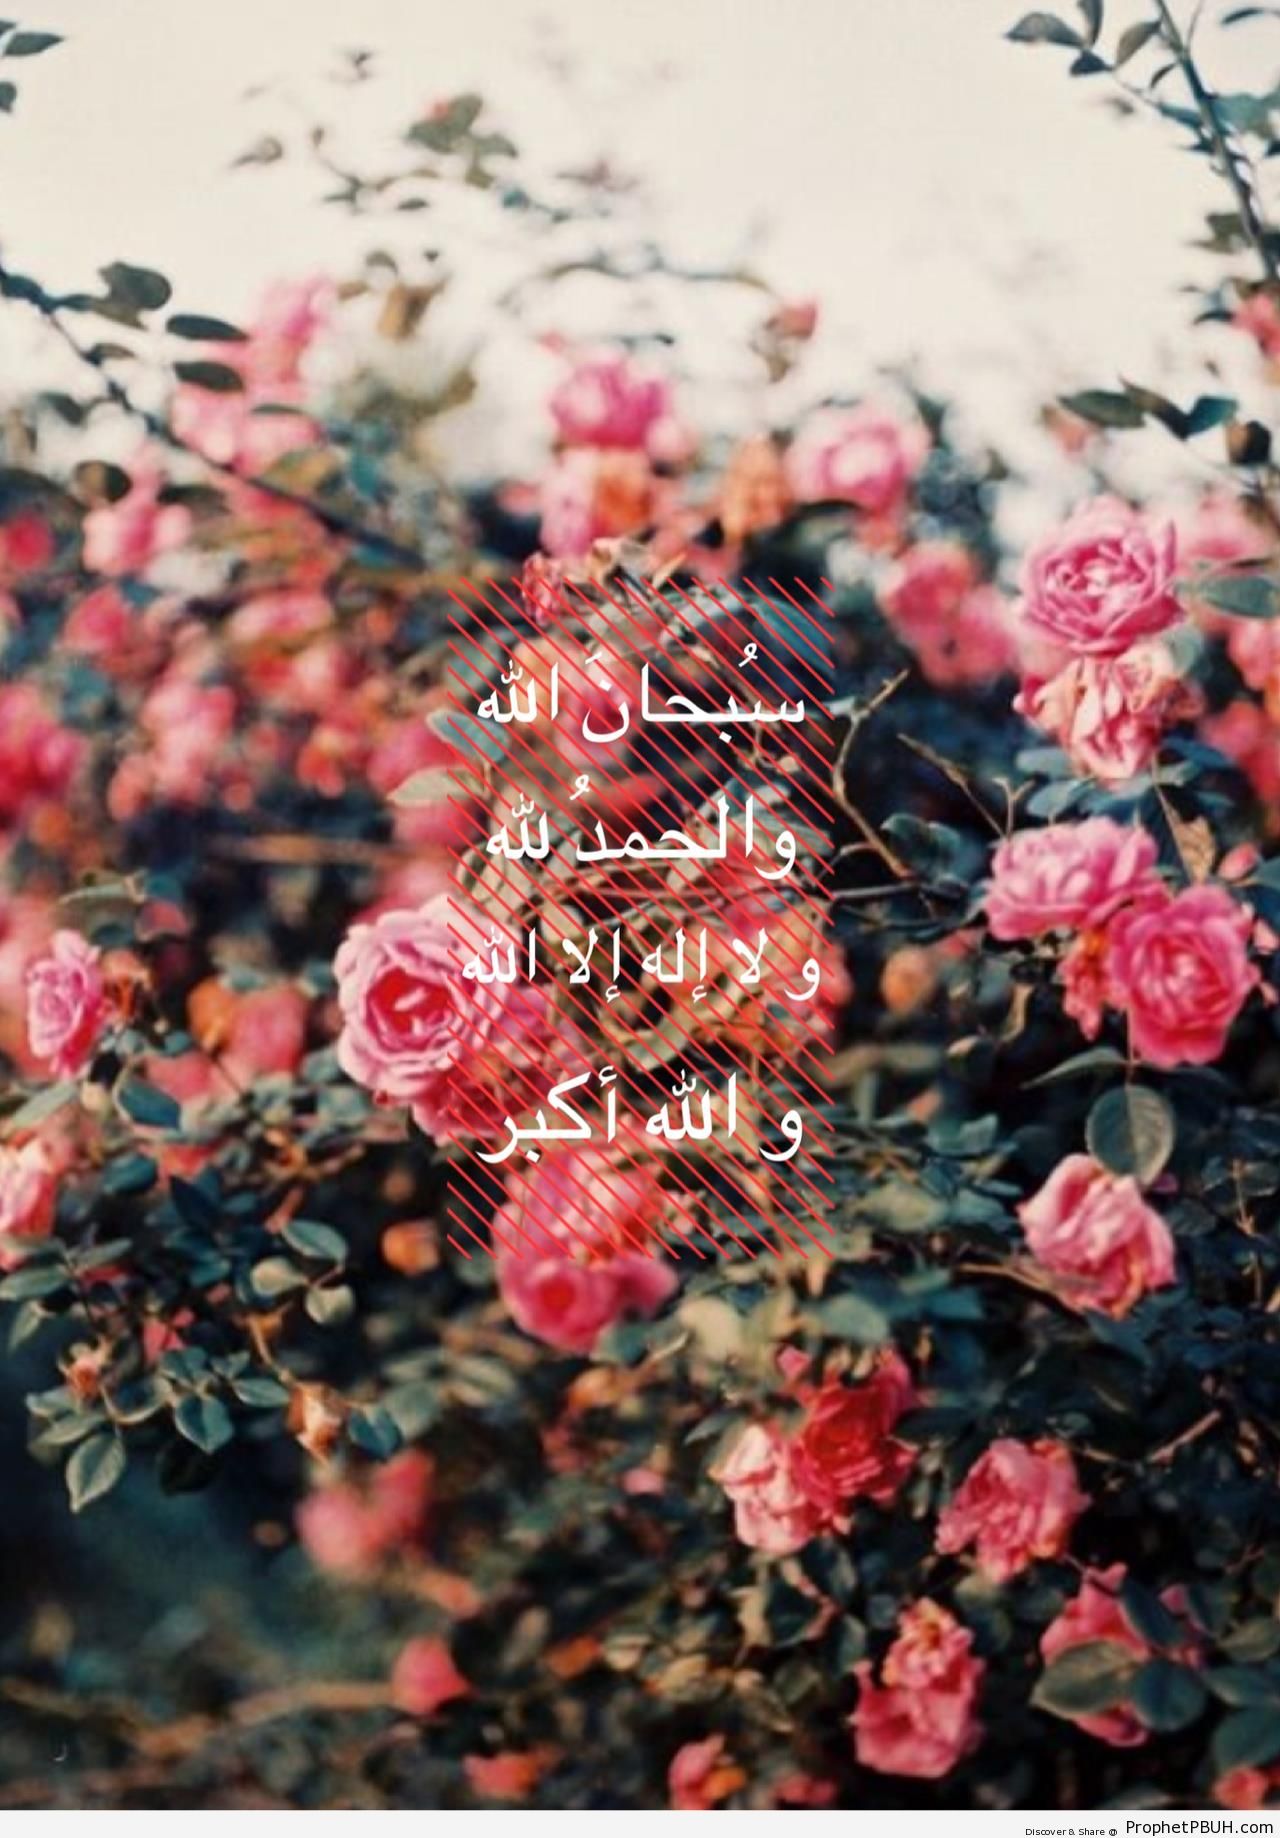 Dhikr Words on Roses - Dhikr Words - Pictures